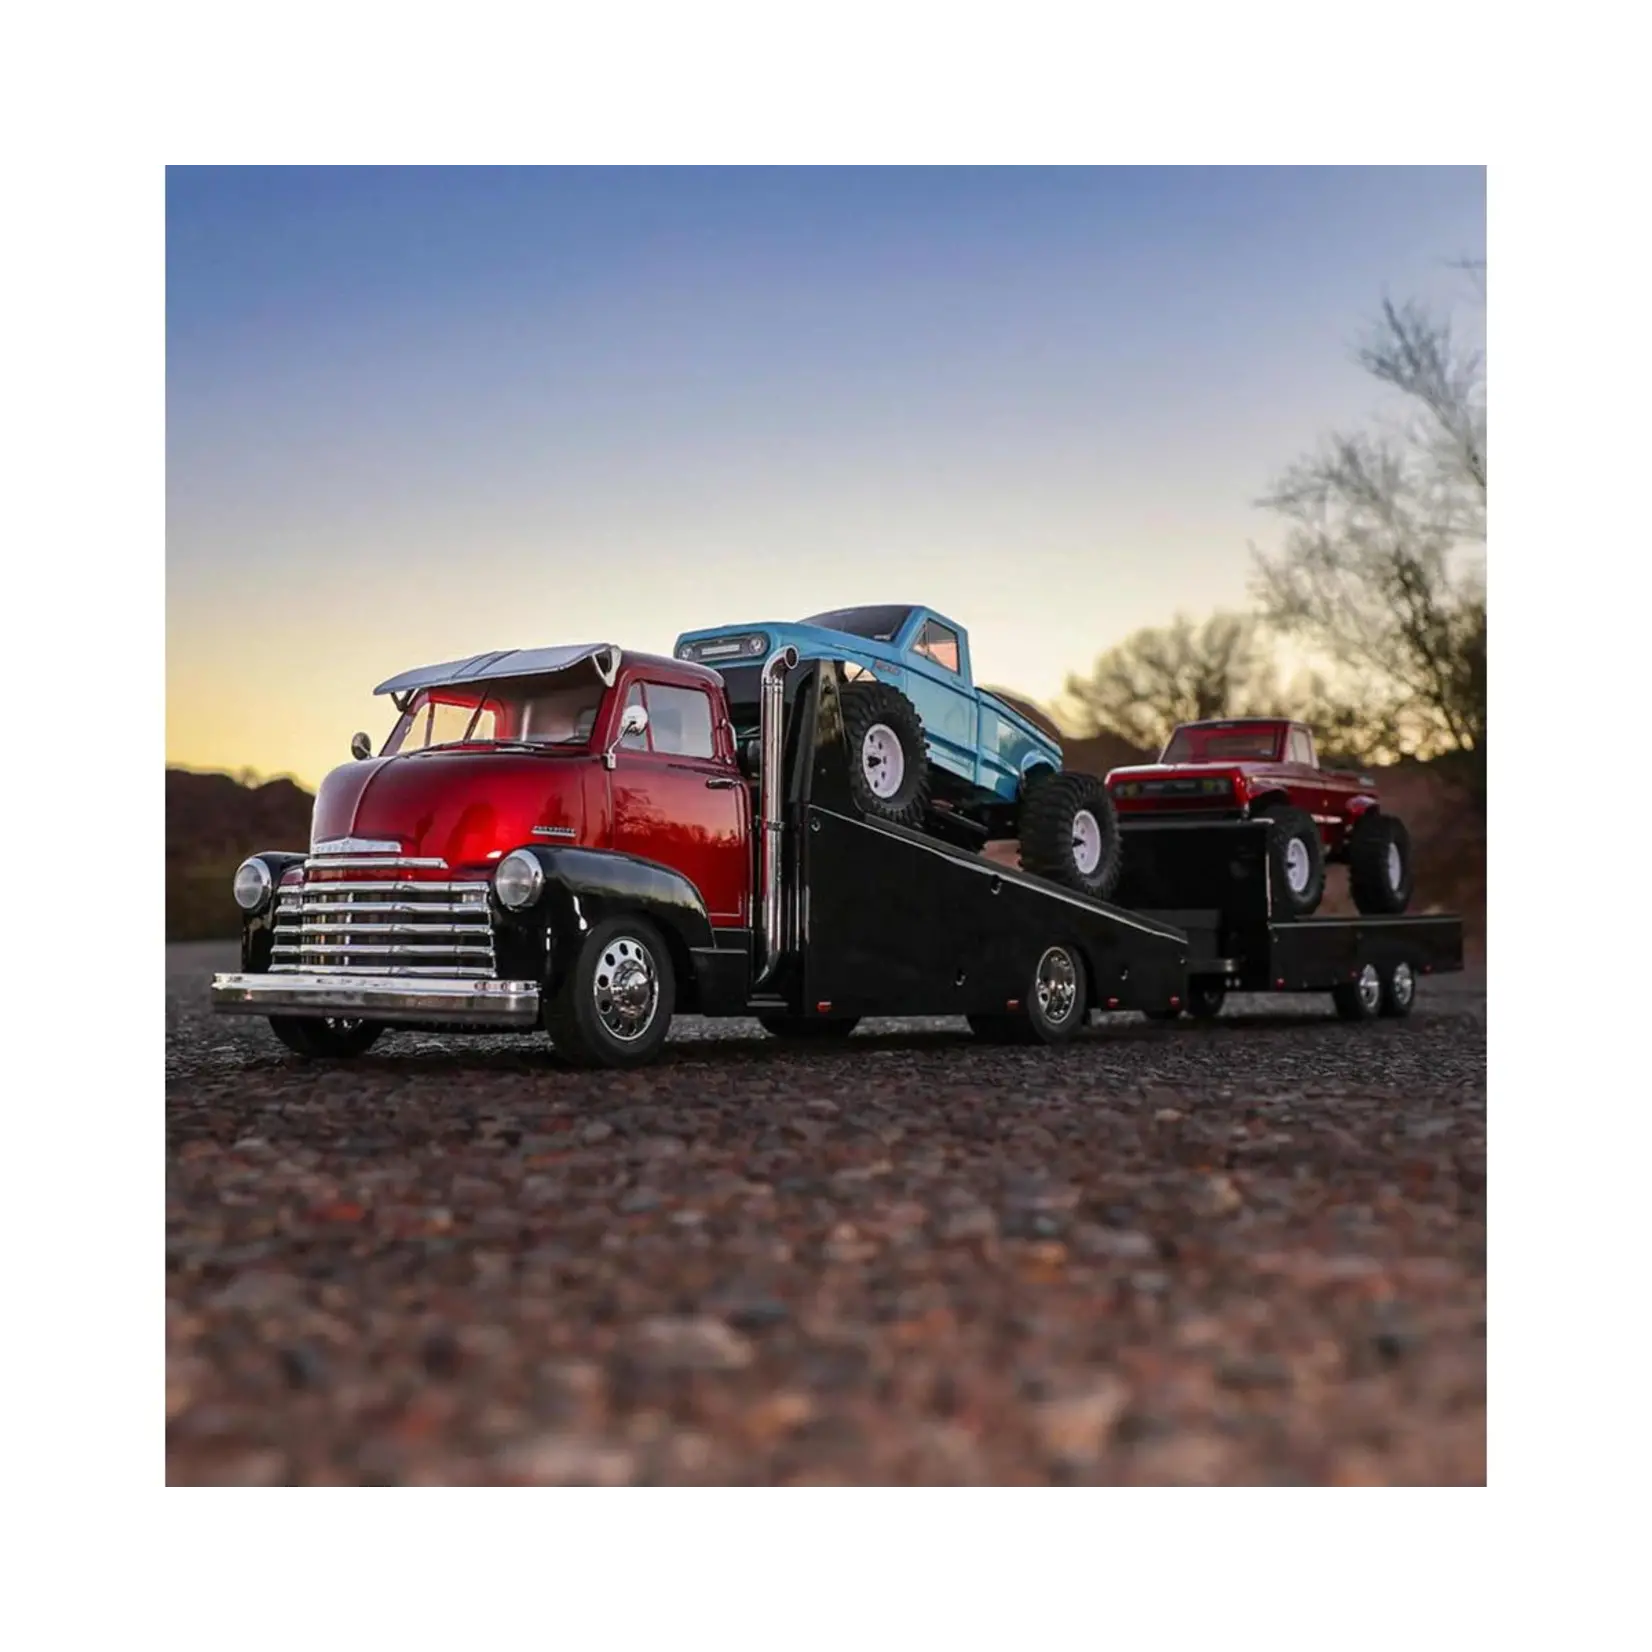 Redcat Racing Redcat 1953 Chevrolet Cab Over Engine RTR 1/10 Scale Custom Hauler (Red) w/2.4GHz Radio #RER22770